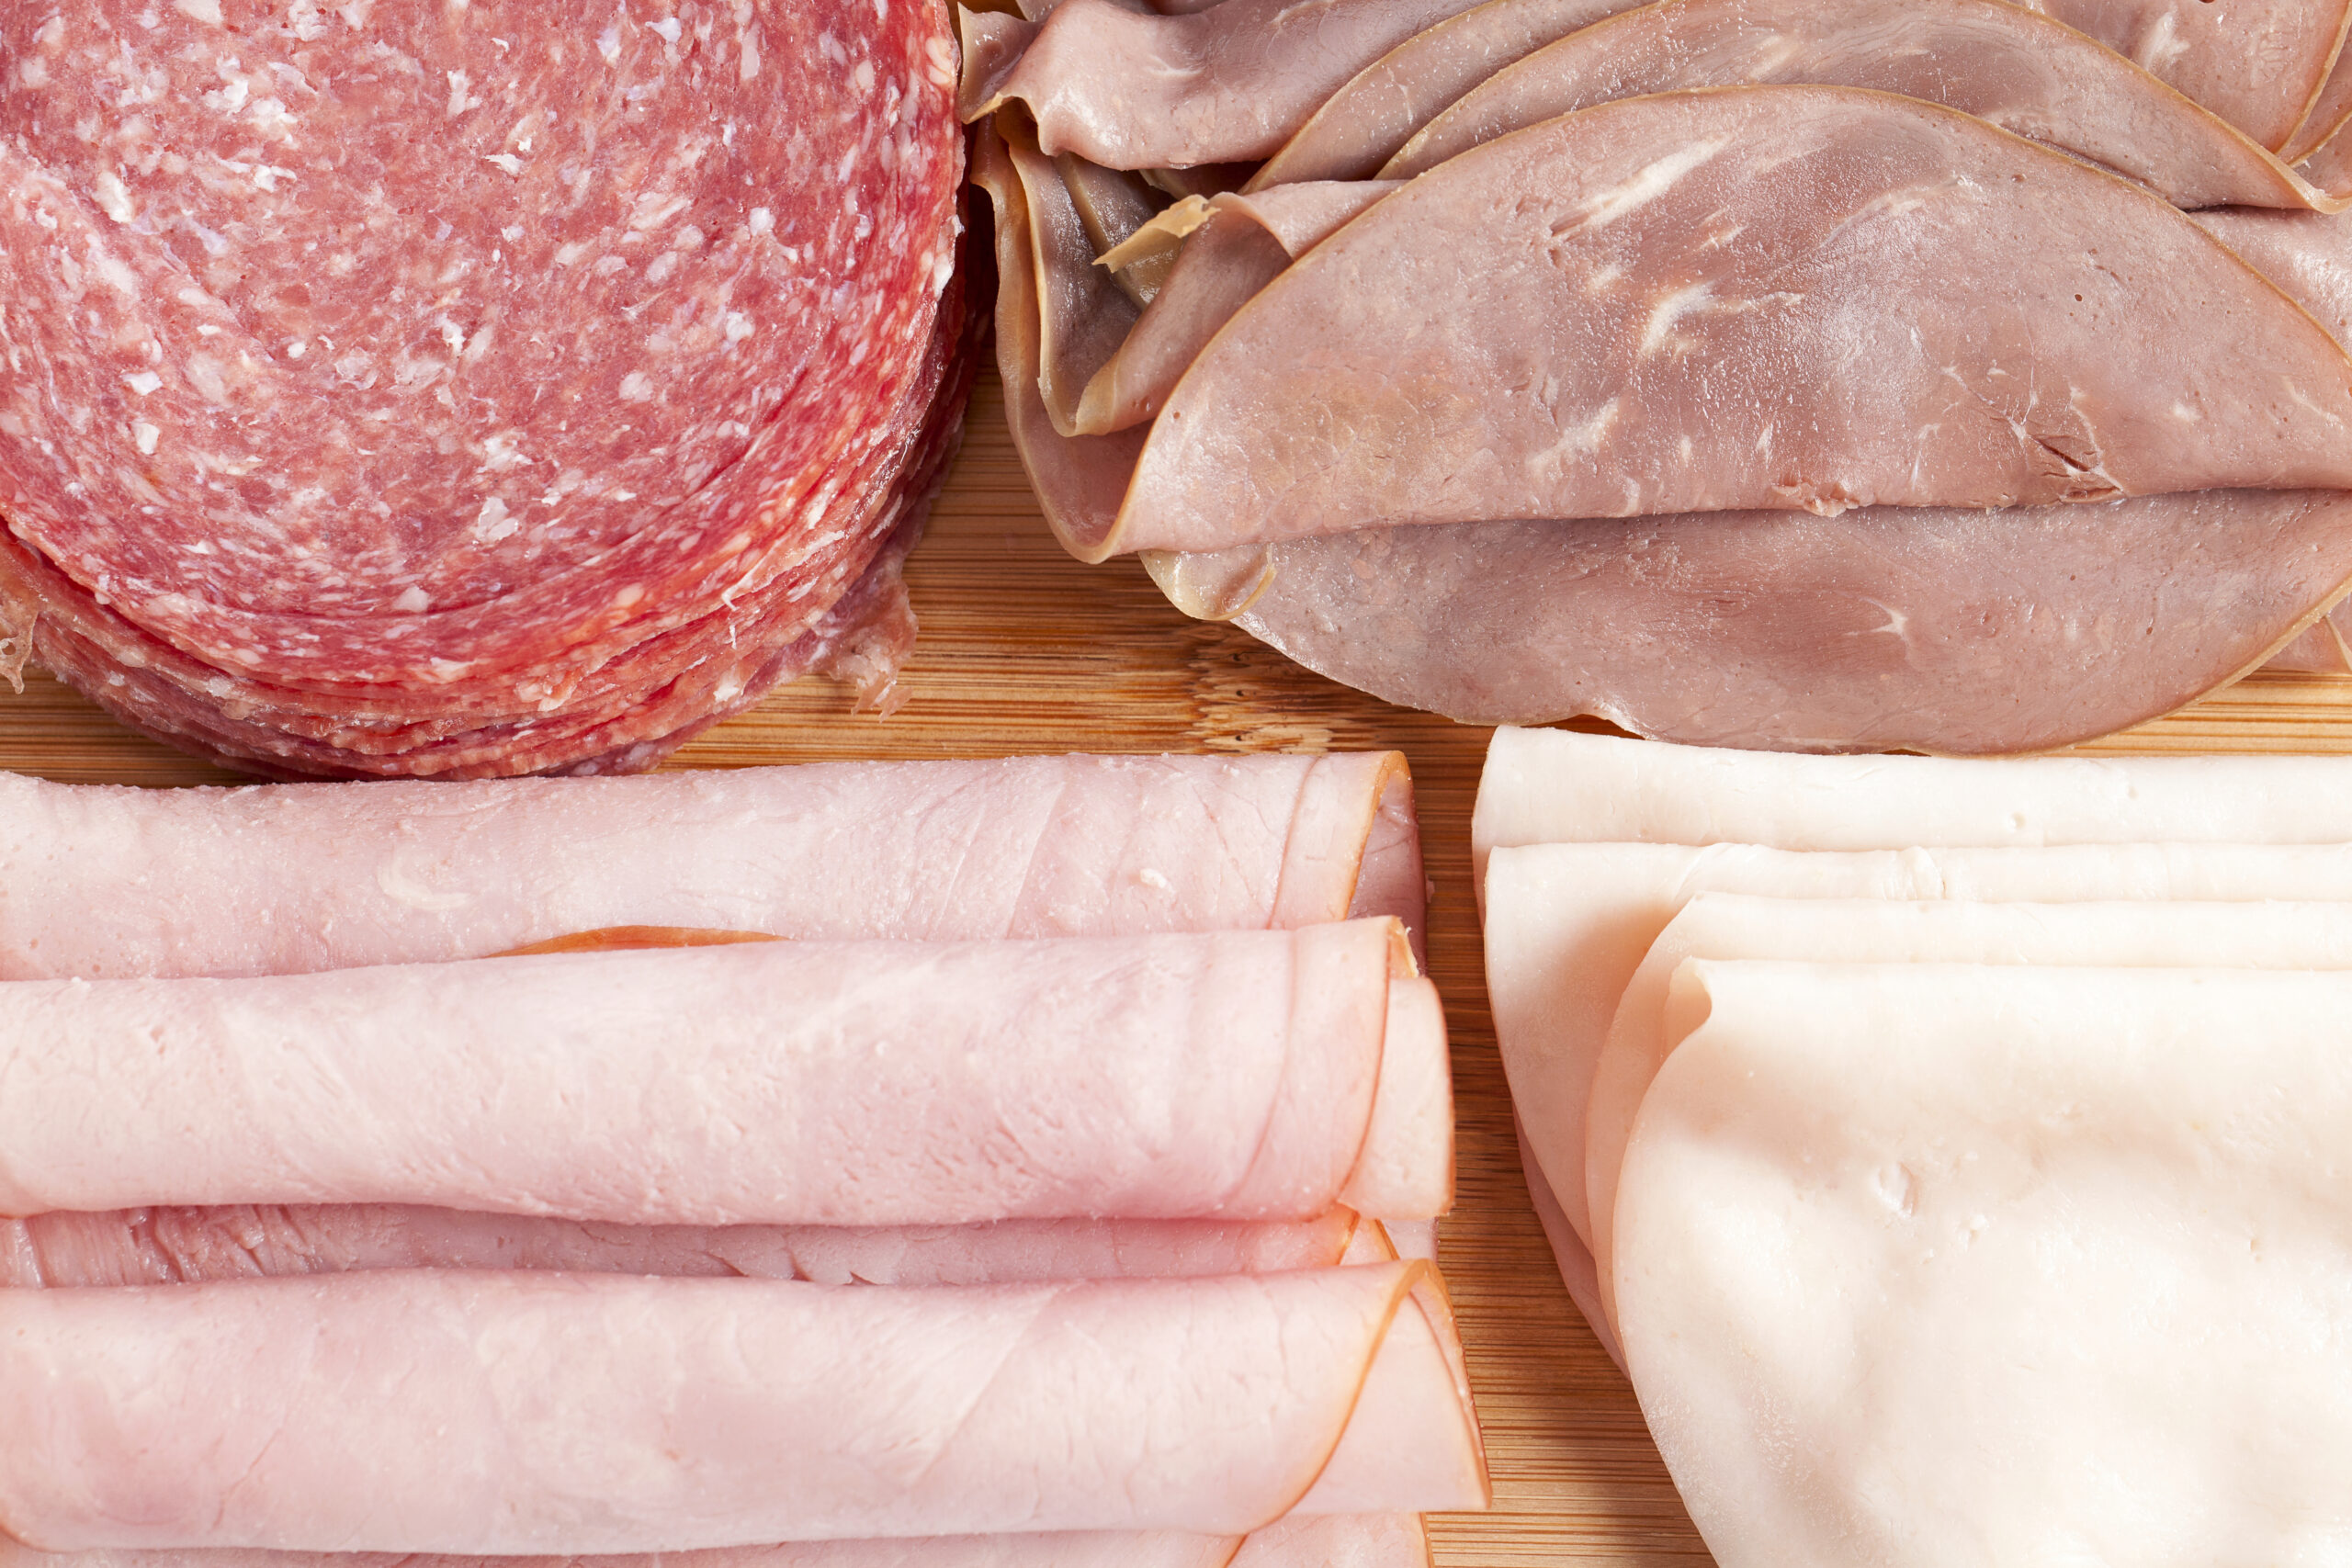 Buying Meat? How to Make Healthier Choices